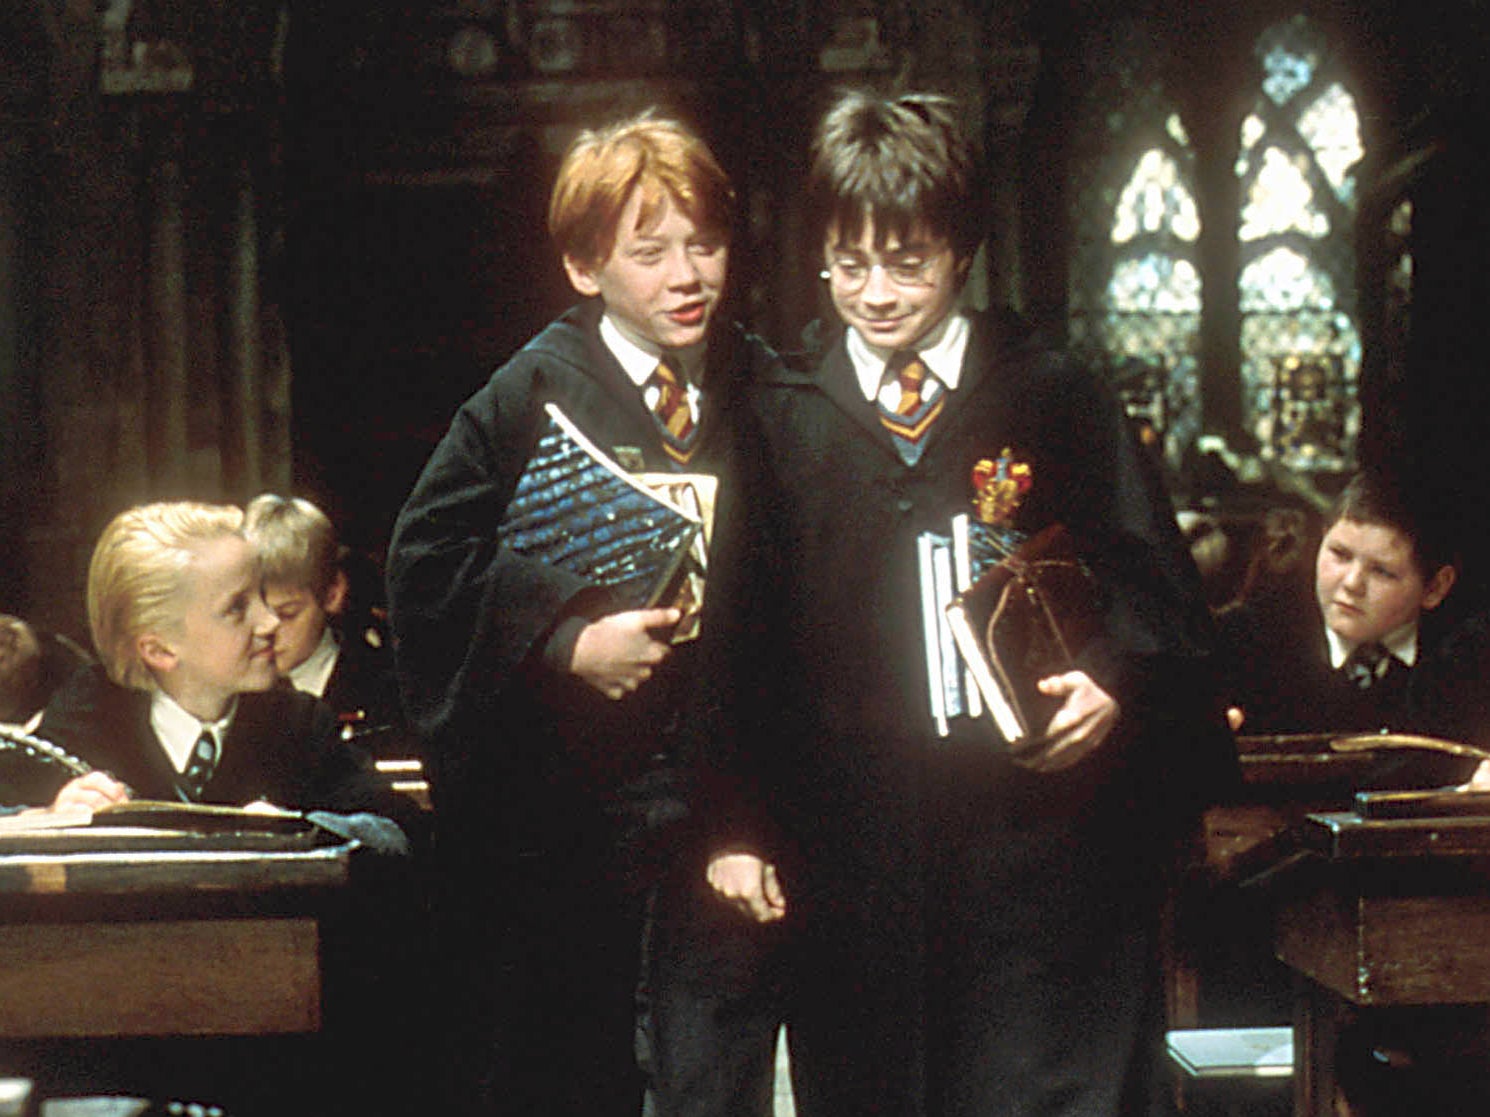 ‘The Philosopher’s Stone’ was released in cinemas 20 years ago